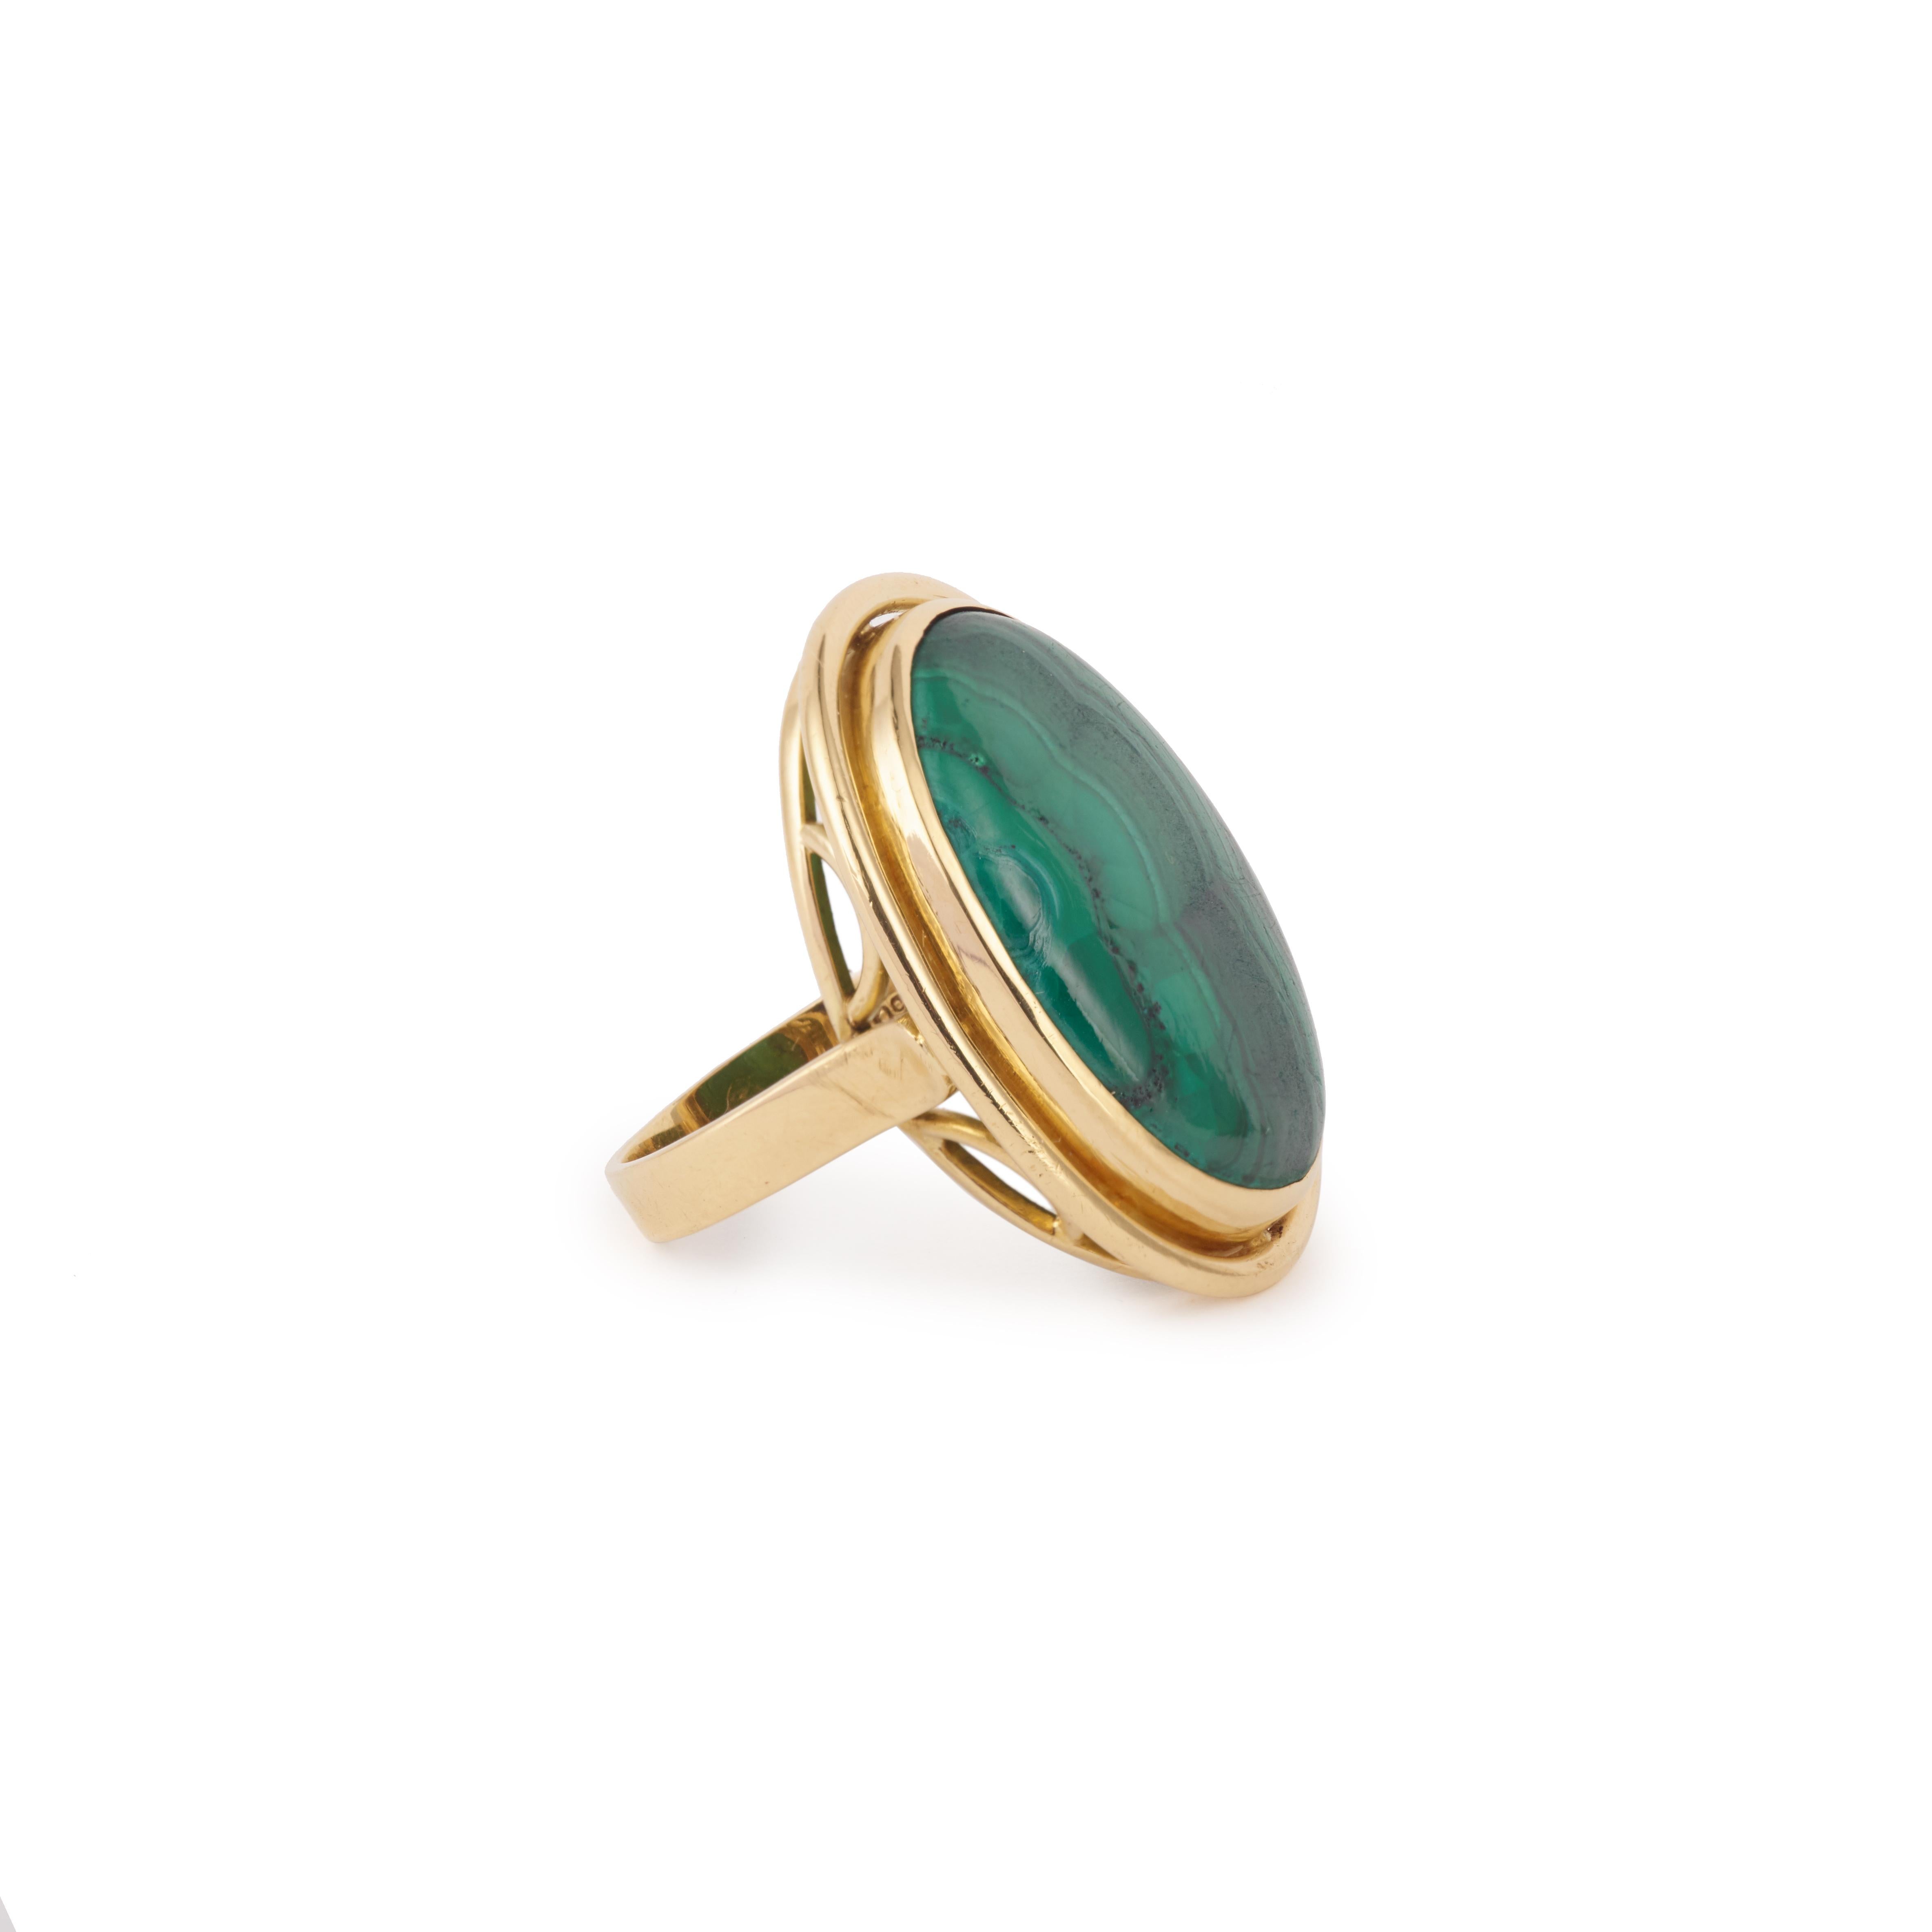 Important vintage cocktail ring in yellow gold set with a malachite plaque.

Dimensions: 31.38 x 25 x 8.05 mm (1.235 x 0.984 x 0.317 inch)

Finger size: 59 (US: 8 3/4)

French work circa 1970

Ring weight : 16 g

18 carat yellow gold, 750/1000th